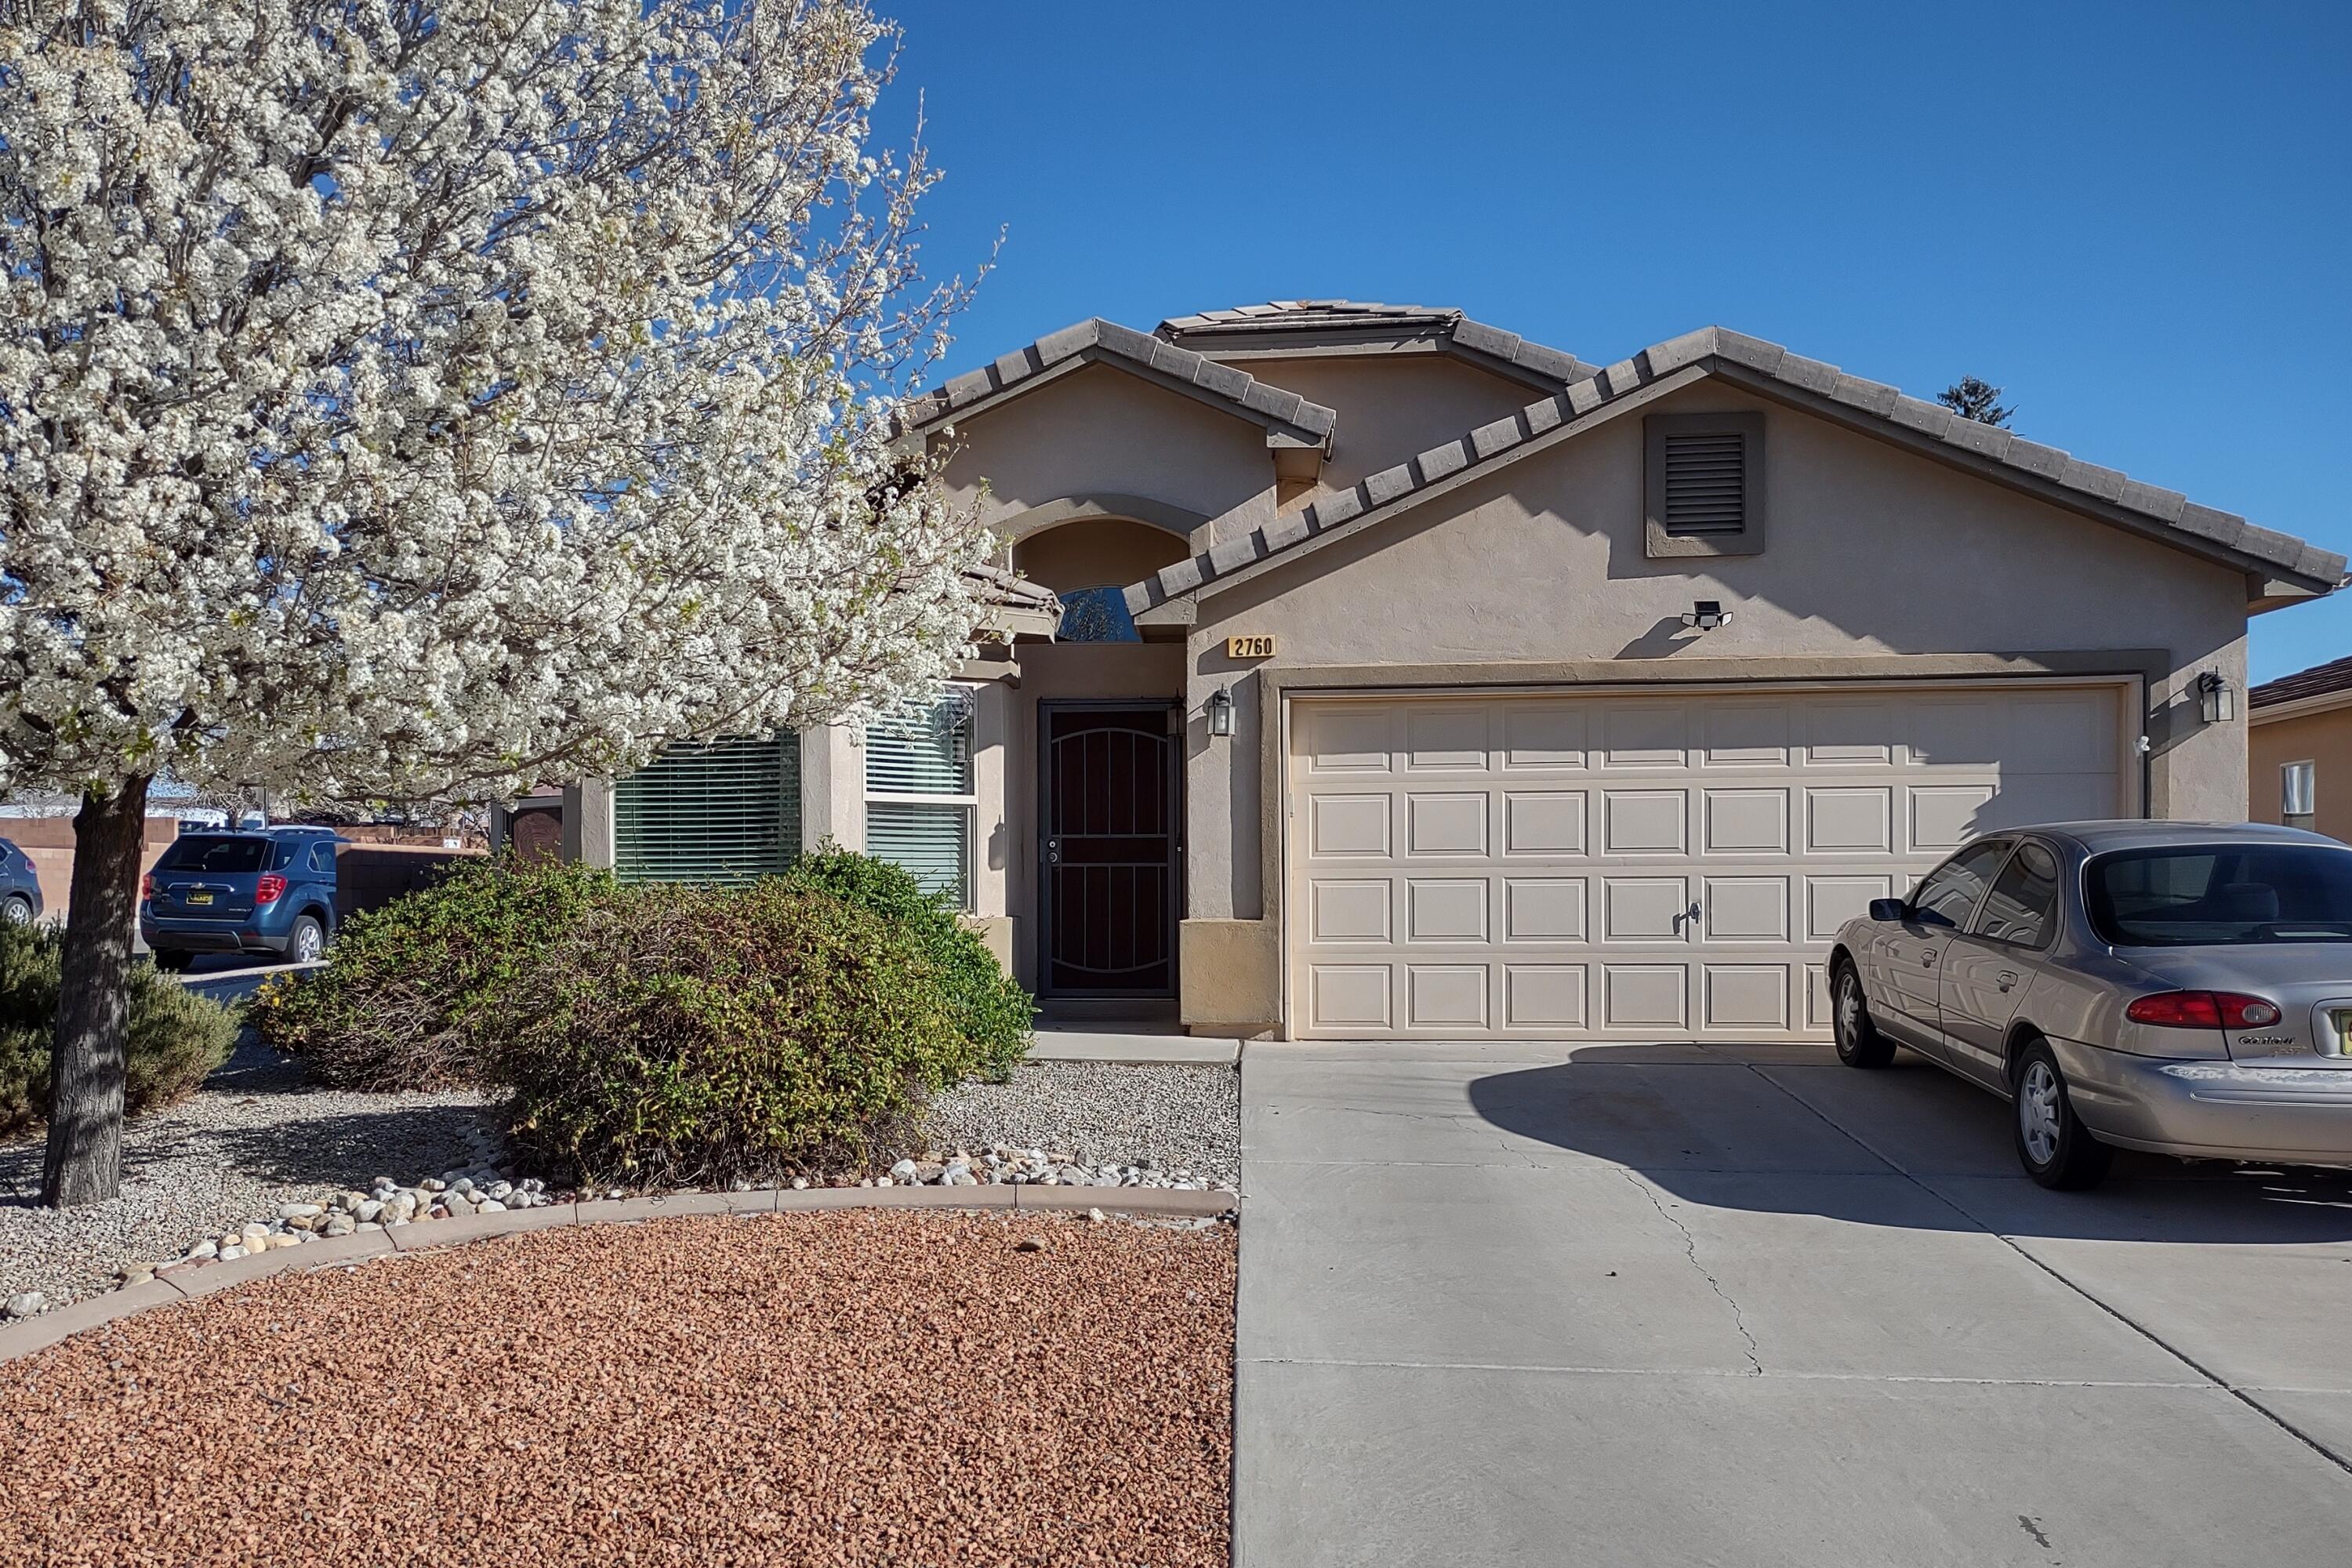 This lovely 4 bedroom home is located in the Cabezon neighborhood on a corner lot with mountain views. The home has two spacious living areas, perfect for entertaining guests. The kitchen has an island, pantry, dining area with a modern light fixture and stainless-steel appliances. From the family room, you can access the backyard which features a covered/open patio and hot tub and views of the mountains. The spacious master suite has a walk-in closet and bath with garden tub and separate shower. Additional features of this home include a two-car garage and a separate laundry room with washer and dryer. With its great location, spacious layout and beautiful mountain views, this home is sure to be a place that the whole family will love.